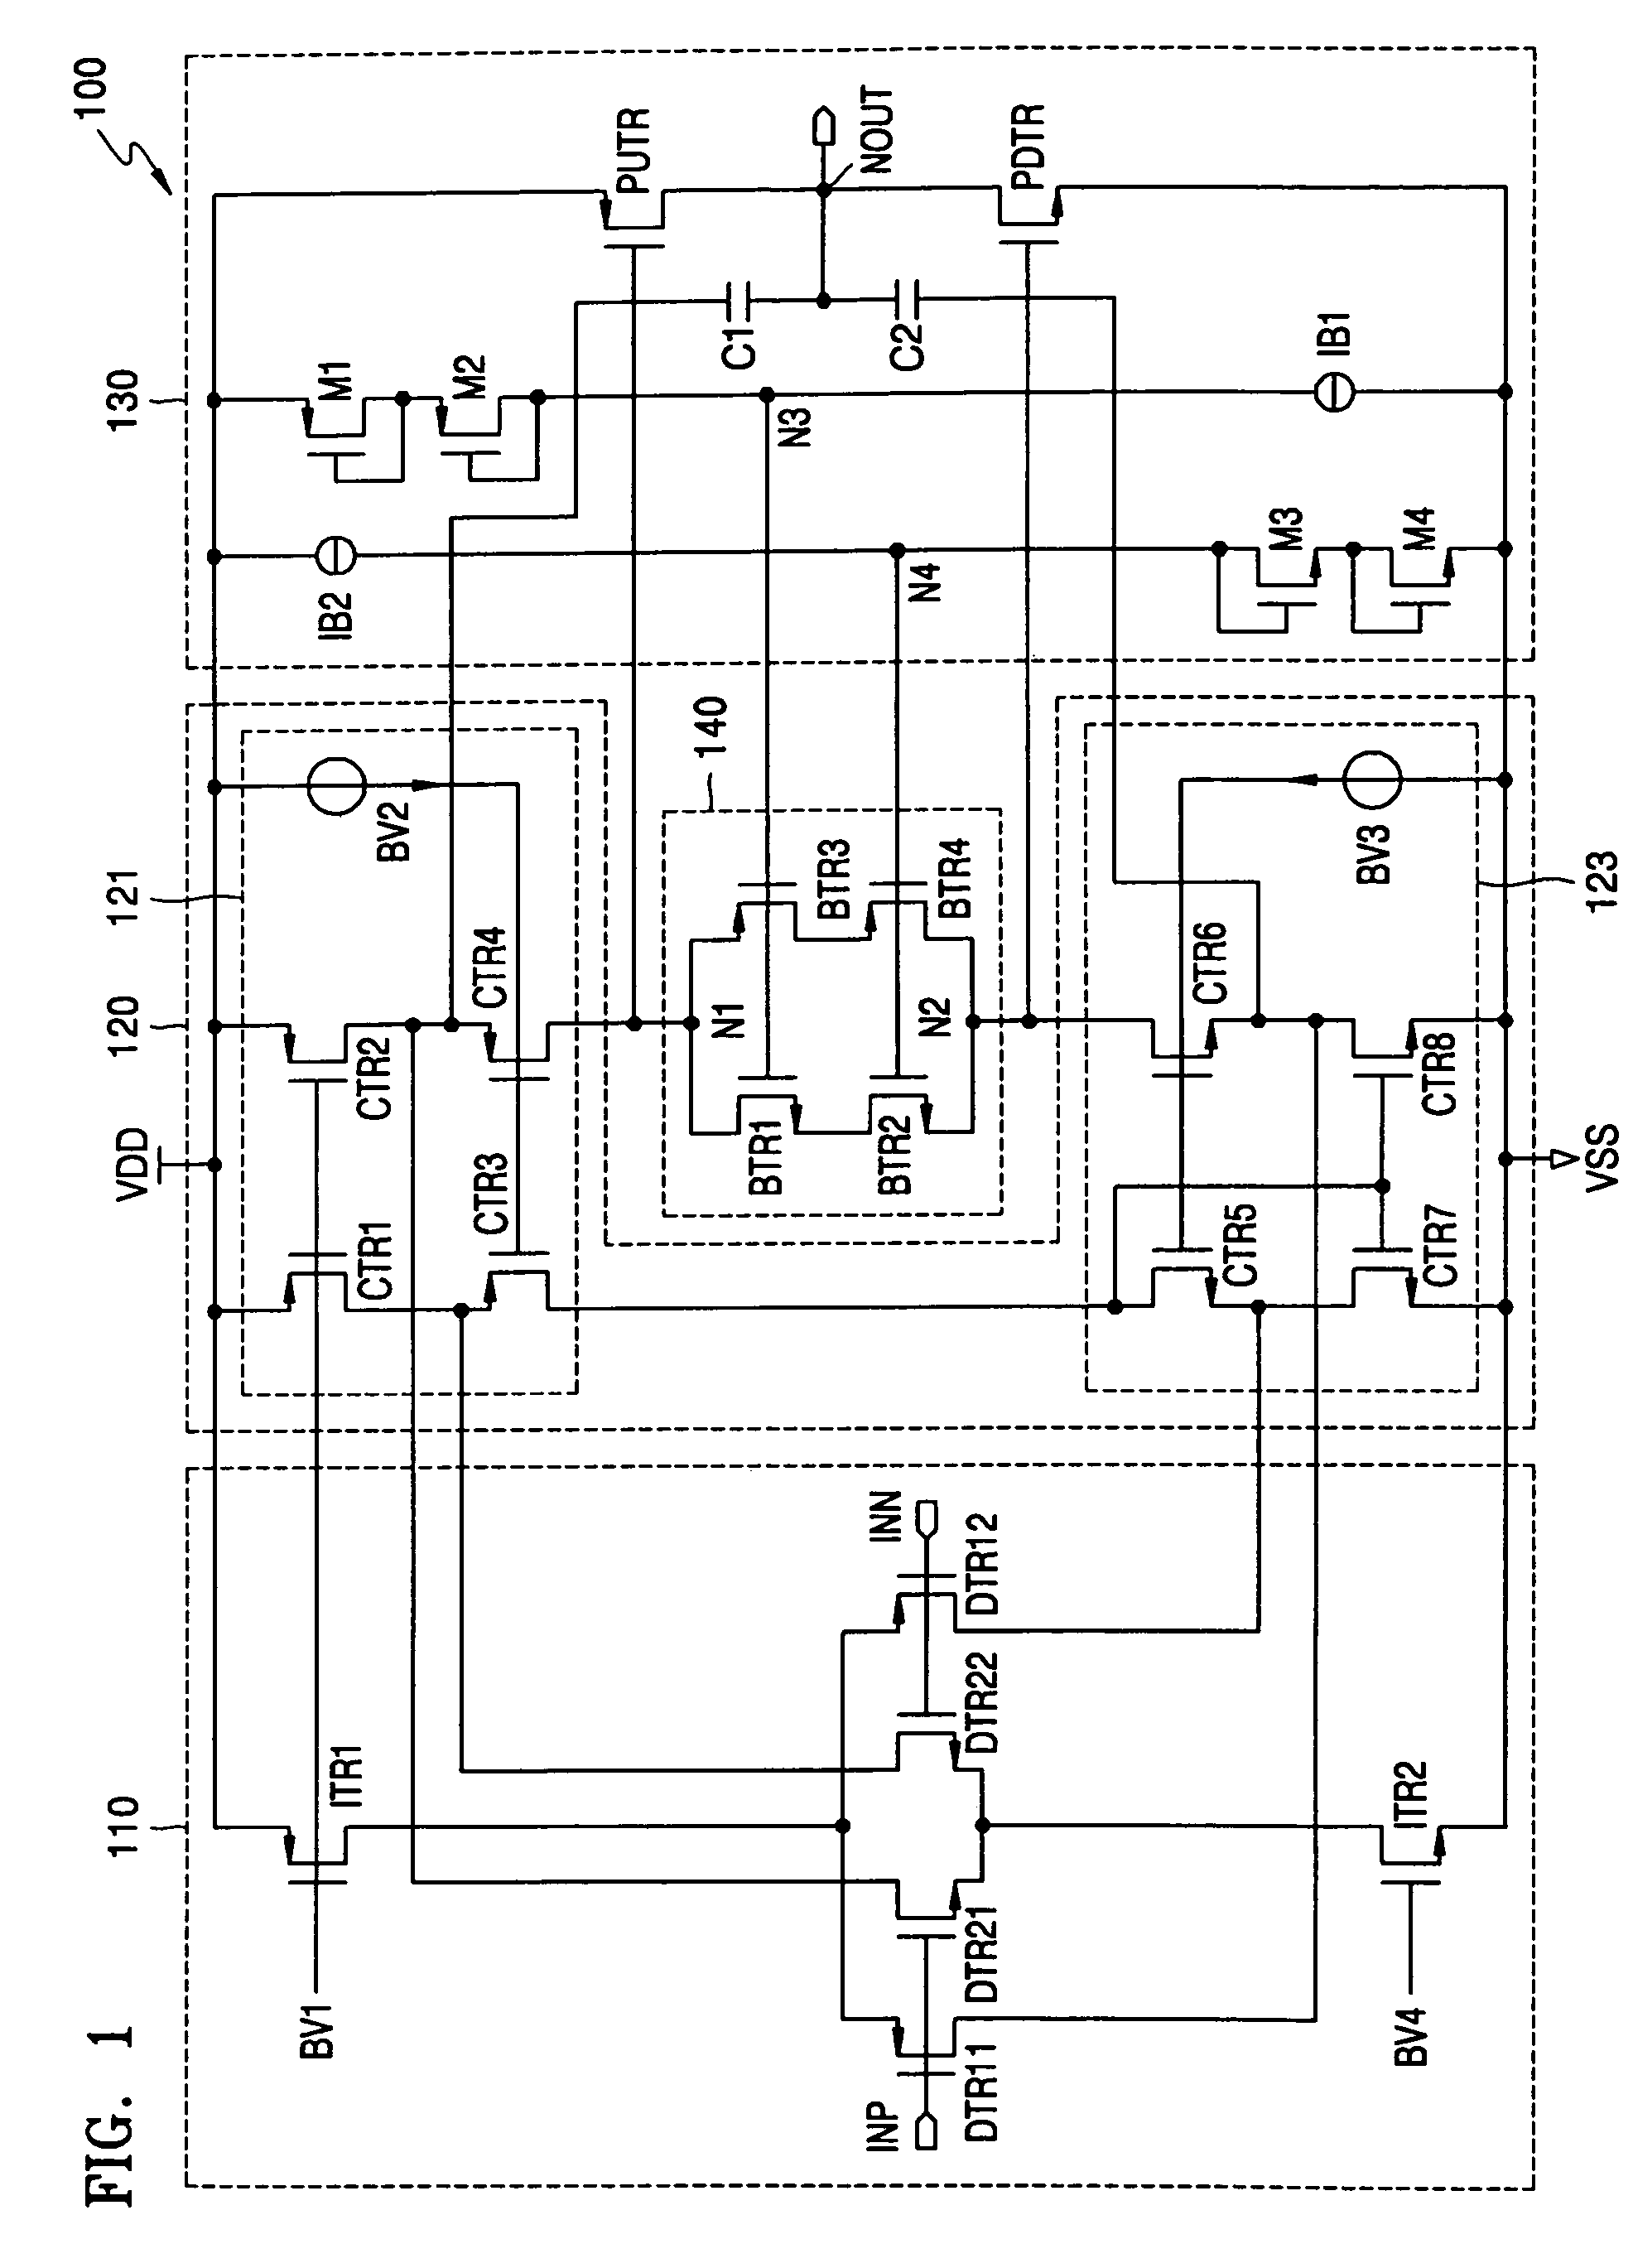 Differential amplifier with cascade control